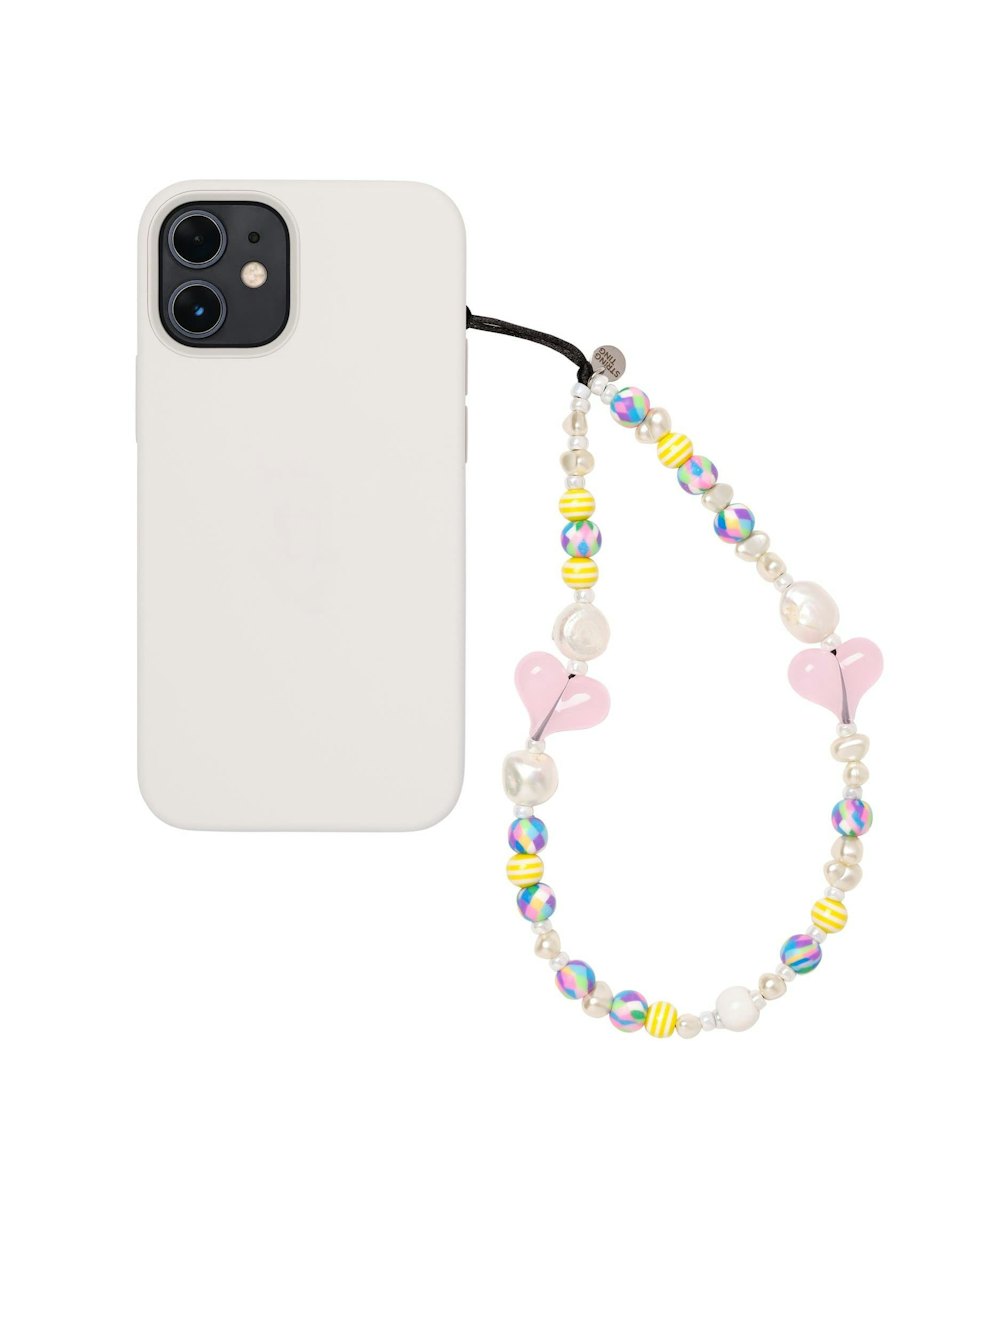 Around the Pearl’d in 80 Days Wristlet Phone Strap